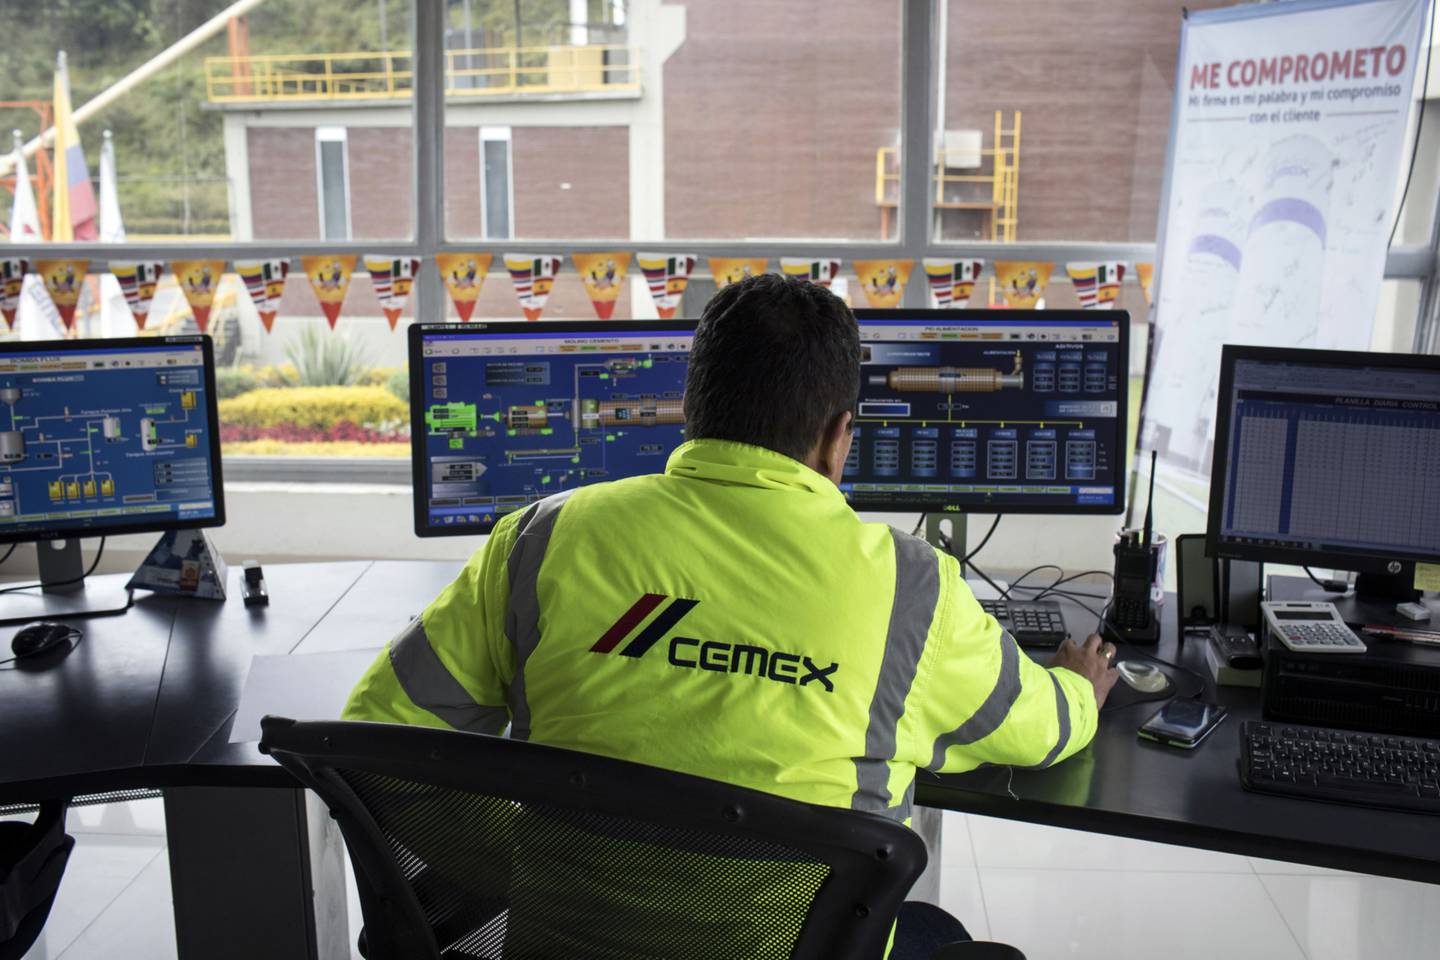 A worker uses computers to monitor the control panels at the Cemex Latam Holdings SA production facility in La Calera, Cundinamarca department, Colombia. Cemex shares rose on the Mexican Stock Exchange on Friday, June 24. Photographer: Nicolo Filippo Rosso/Bloomberg